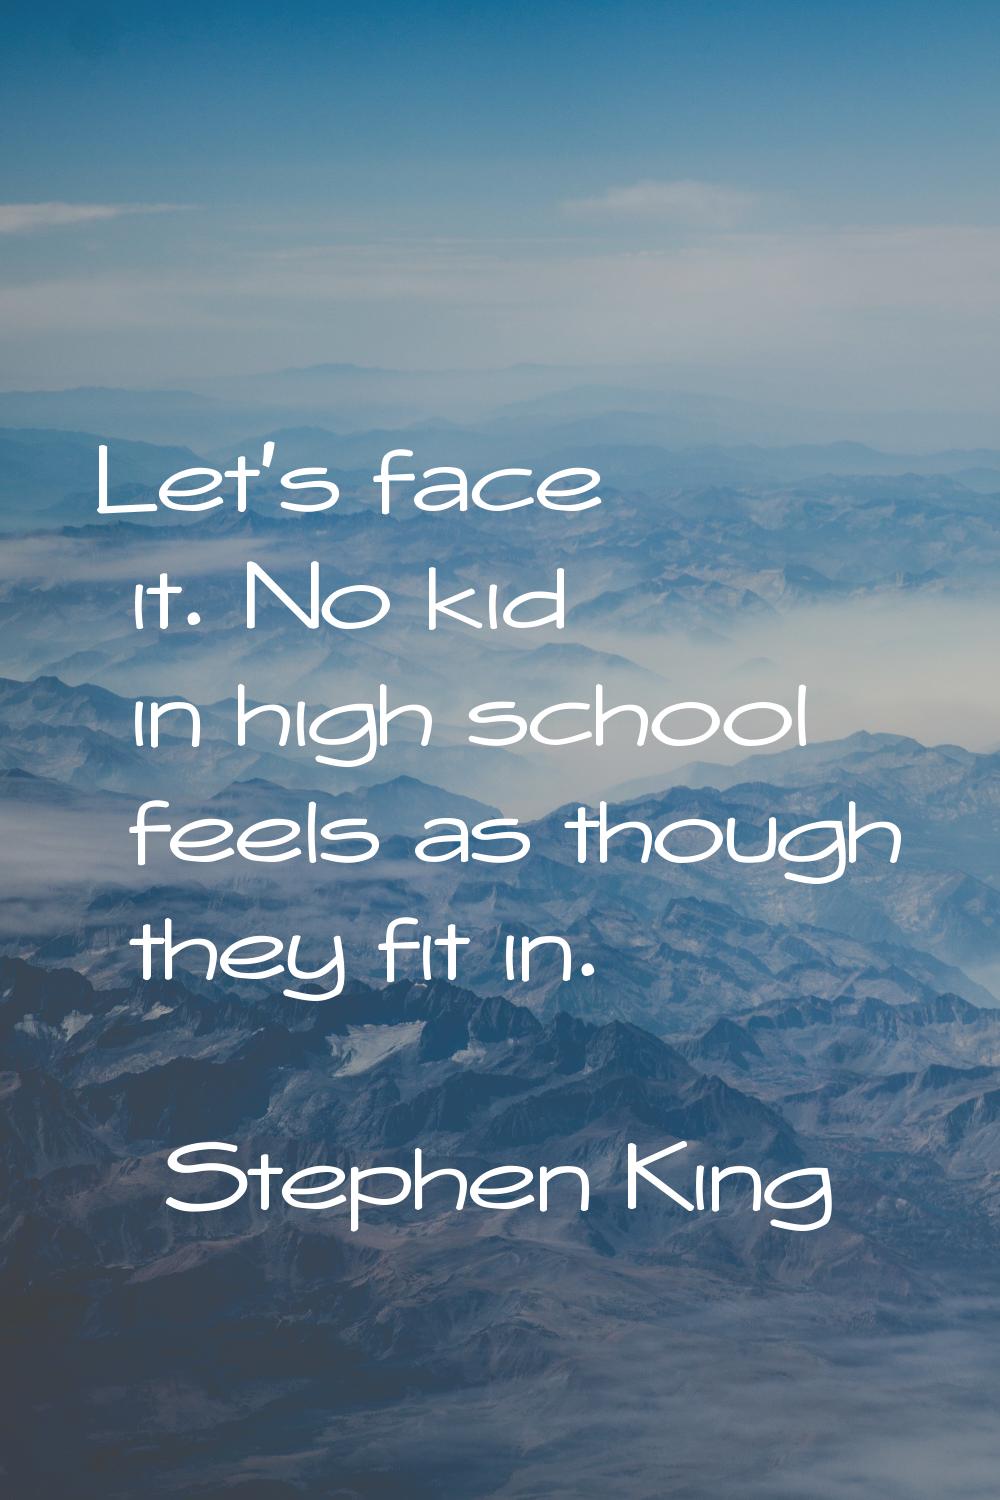 Let's face it. No kid in high school feels as though they fit in.